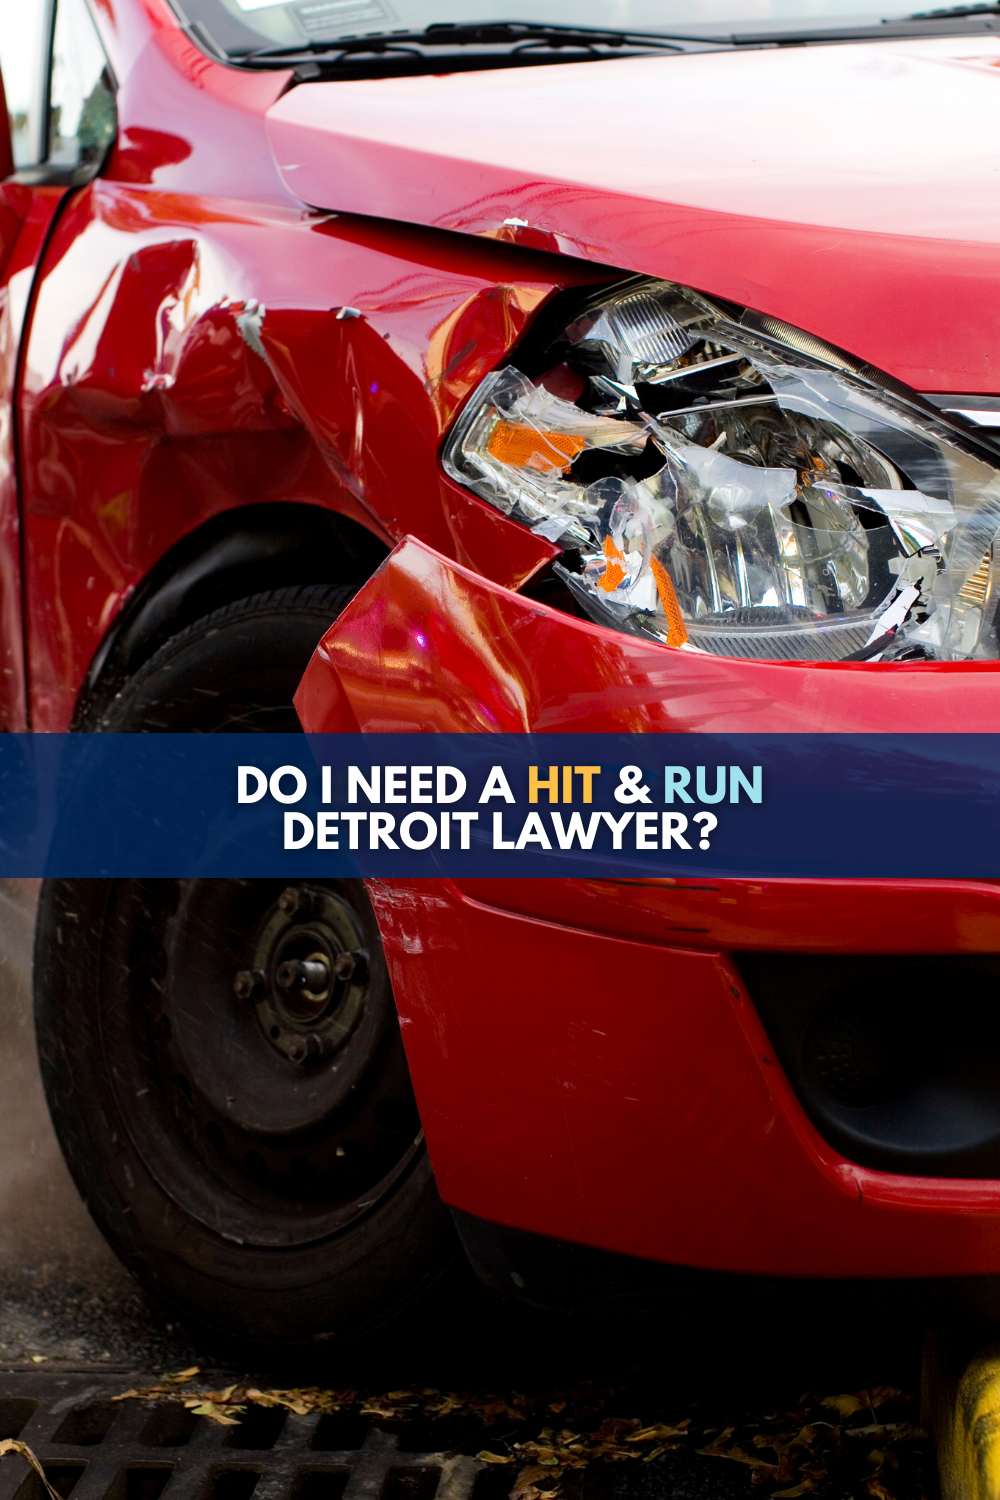 Hit and Run Detroit Lawyer: Do I Need One?